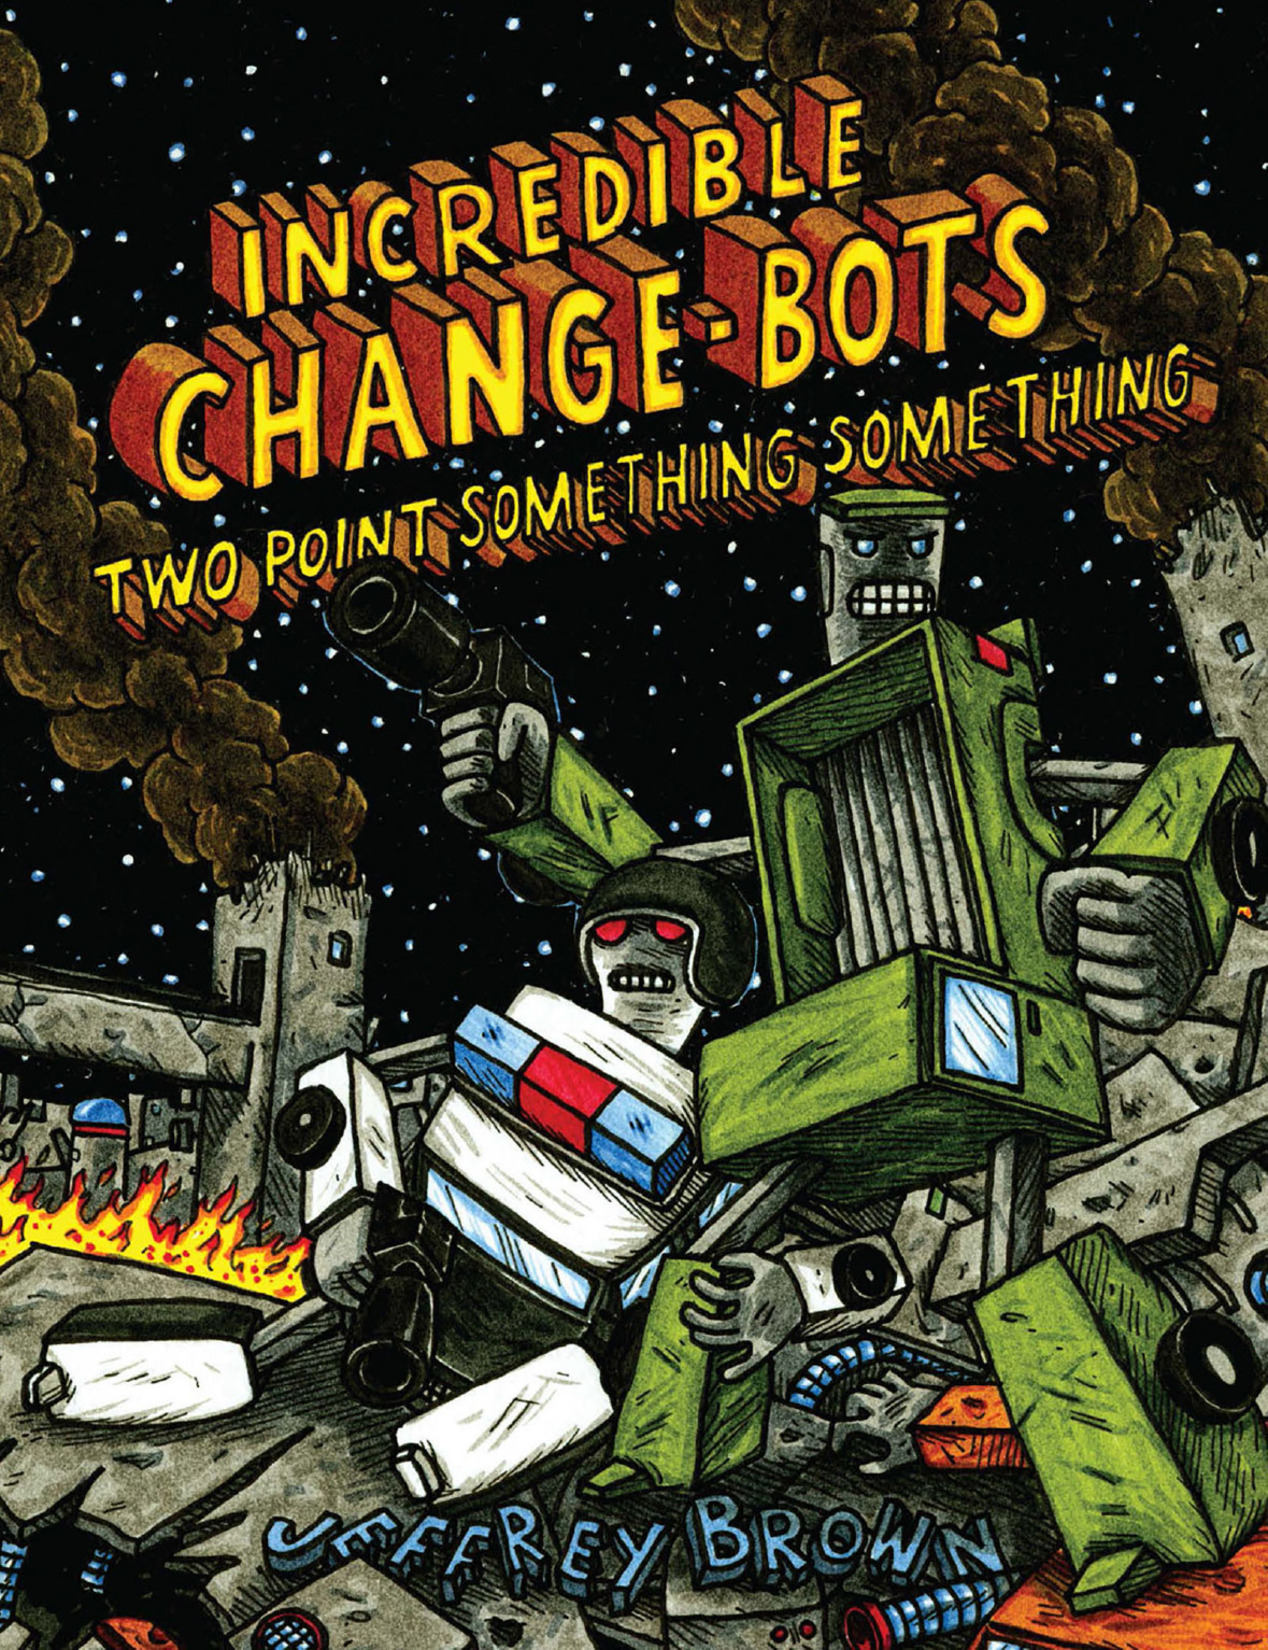 Read online Incredible Change-Bots: Two Point Something Something comic -  Issue # TPB (Part 1) - 1